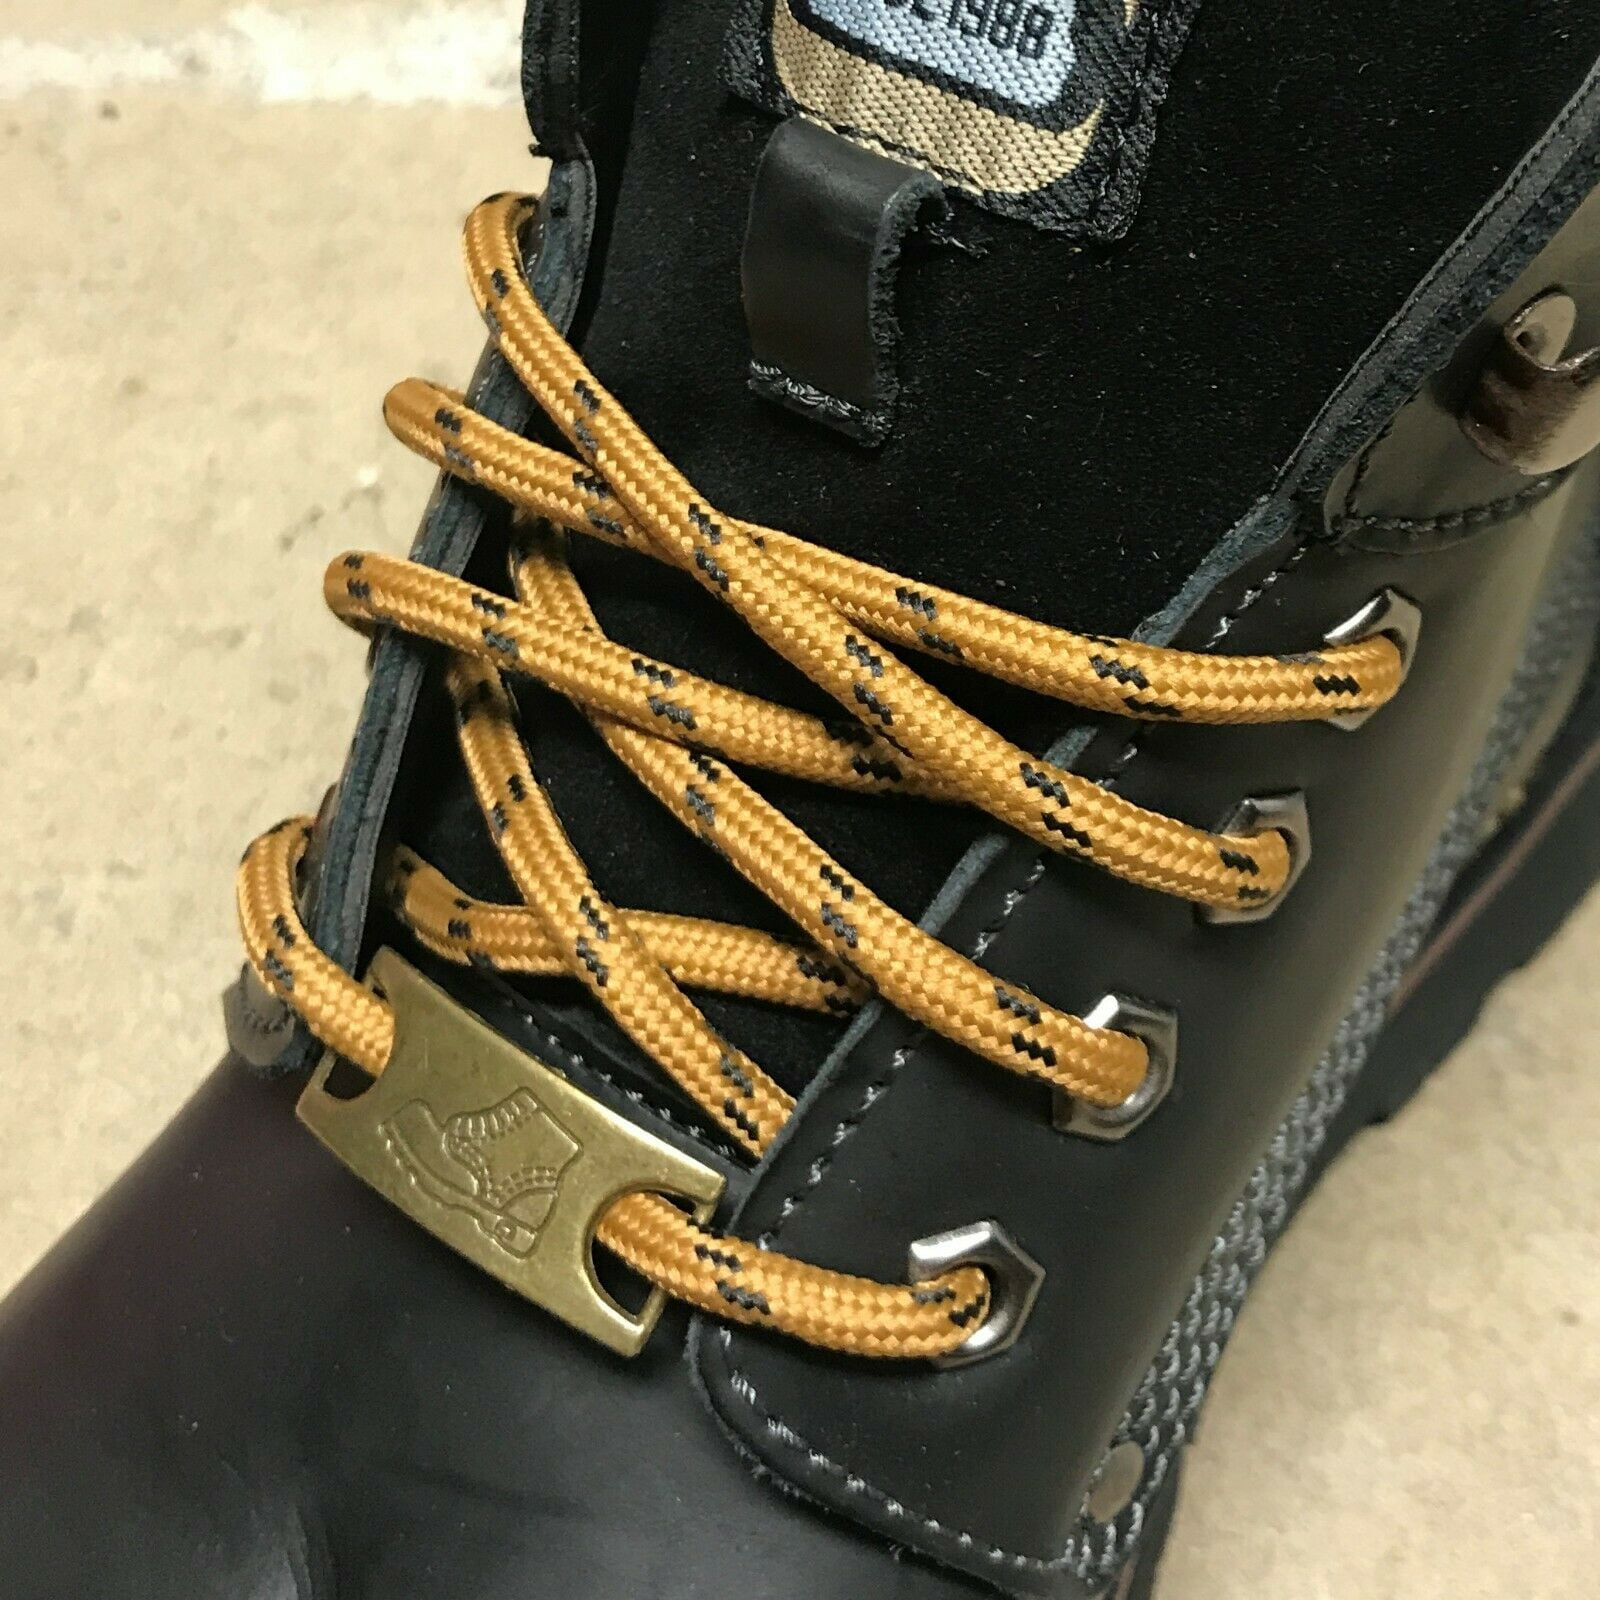 2 pairs Round boot shoe laces for hiking boots 38 40 44 45 46 48 50 52 54 inch 